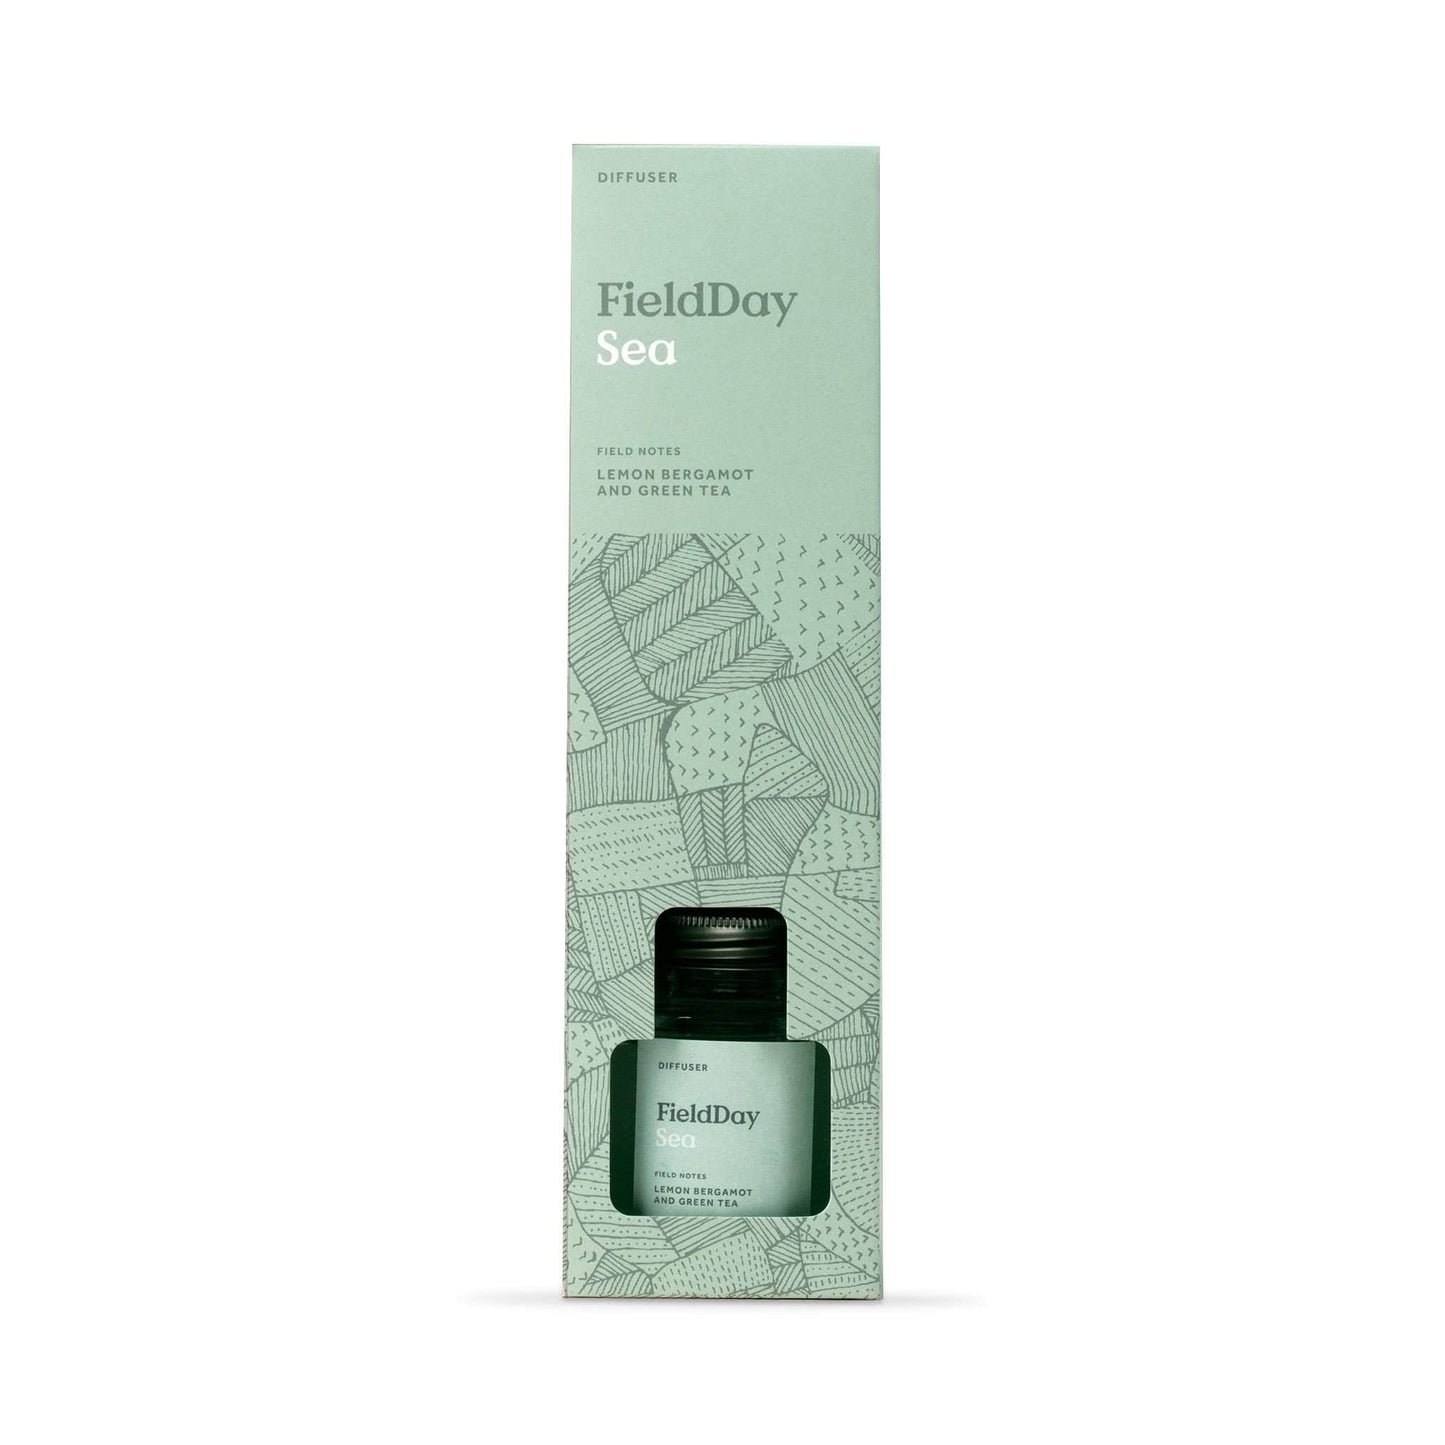 FieldDay Home Fragrance FieldDay Classic Collection Diffuser 100ml - Sea